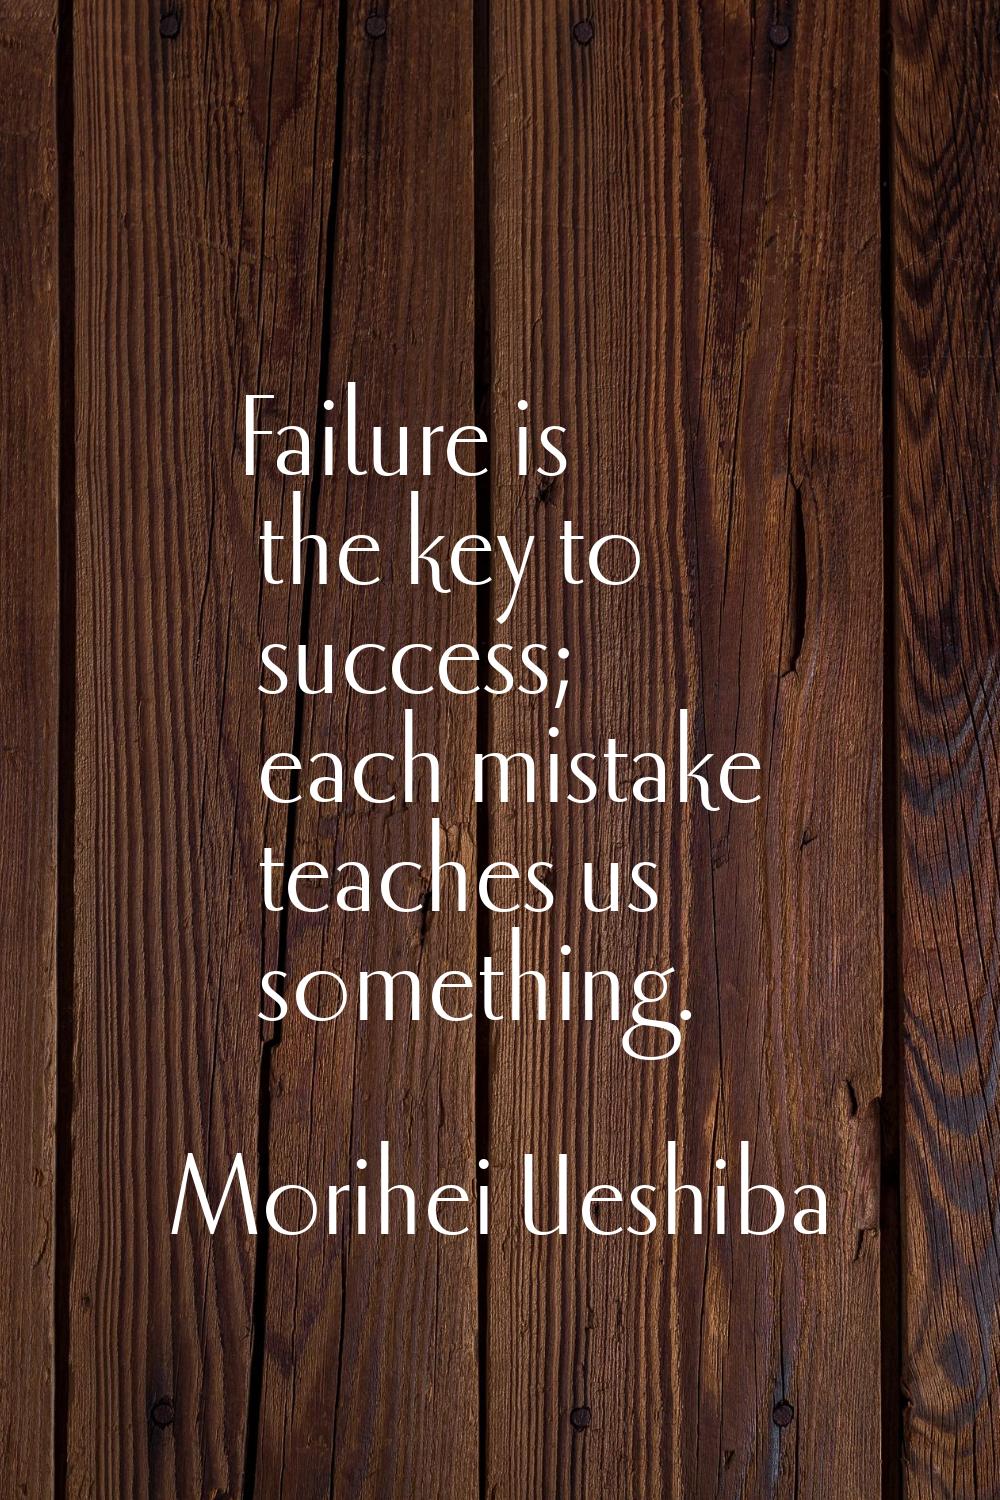 Failure is the key to success; each mistake teaches us something.